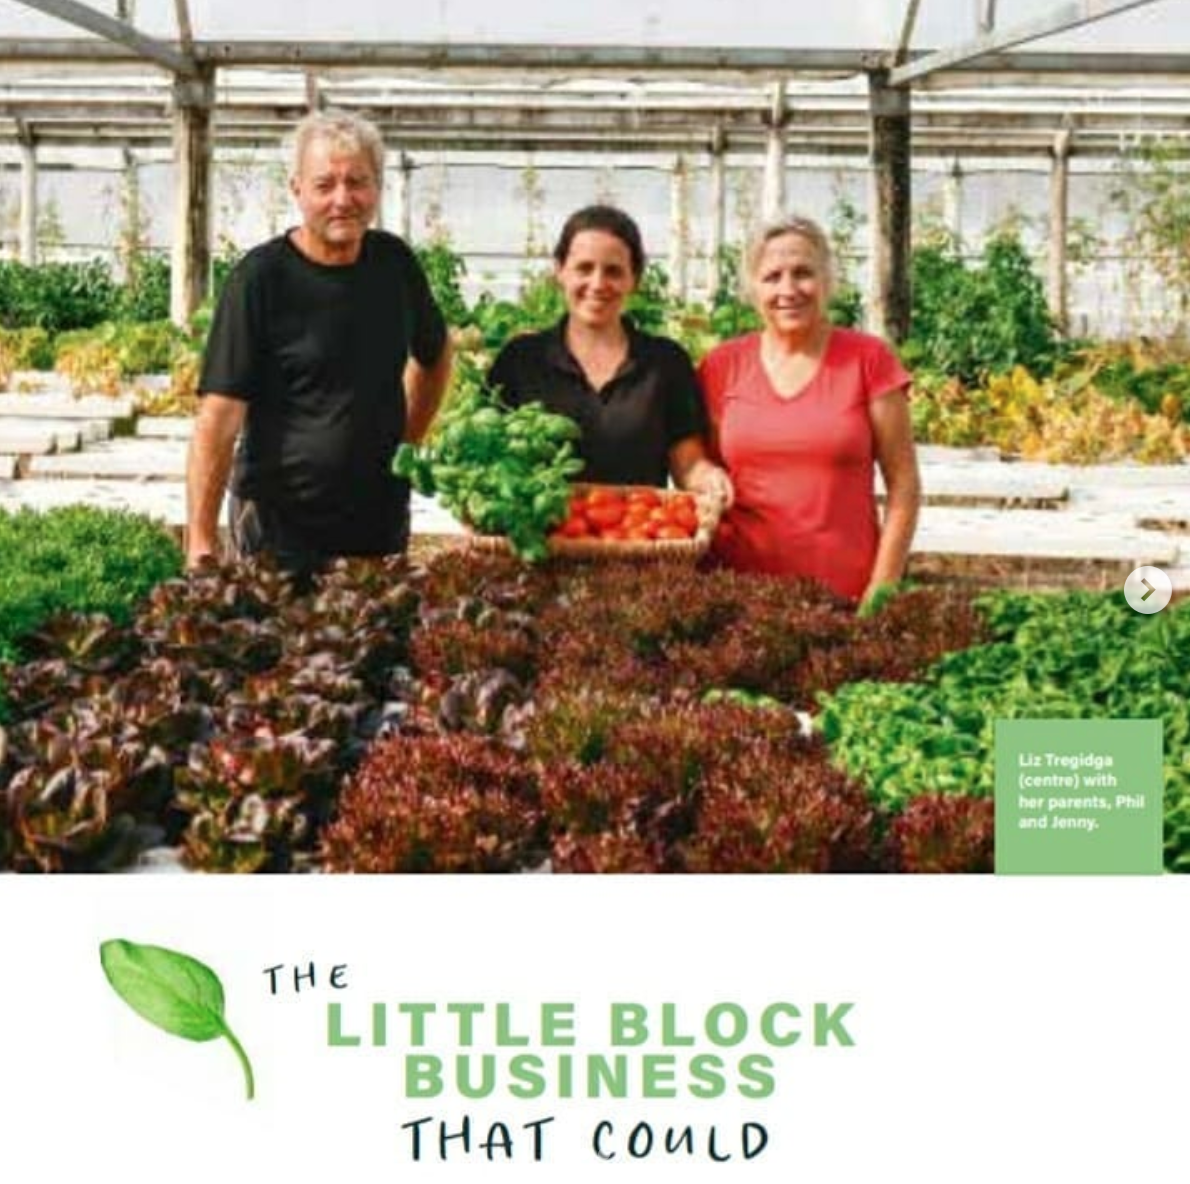 We are featured in the NZ Lifestyle Block magazine this month!